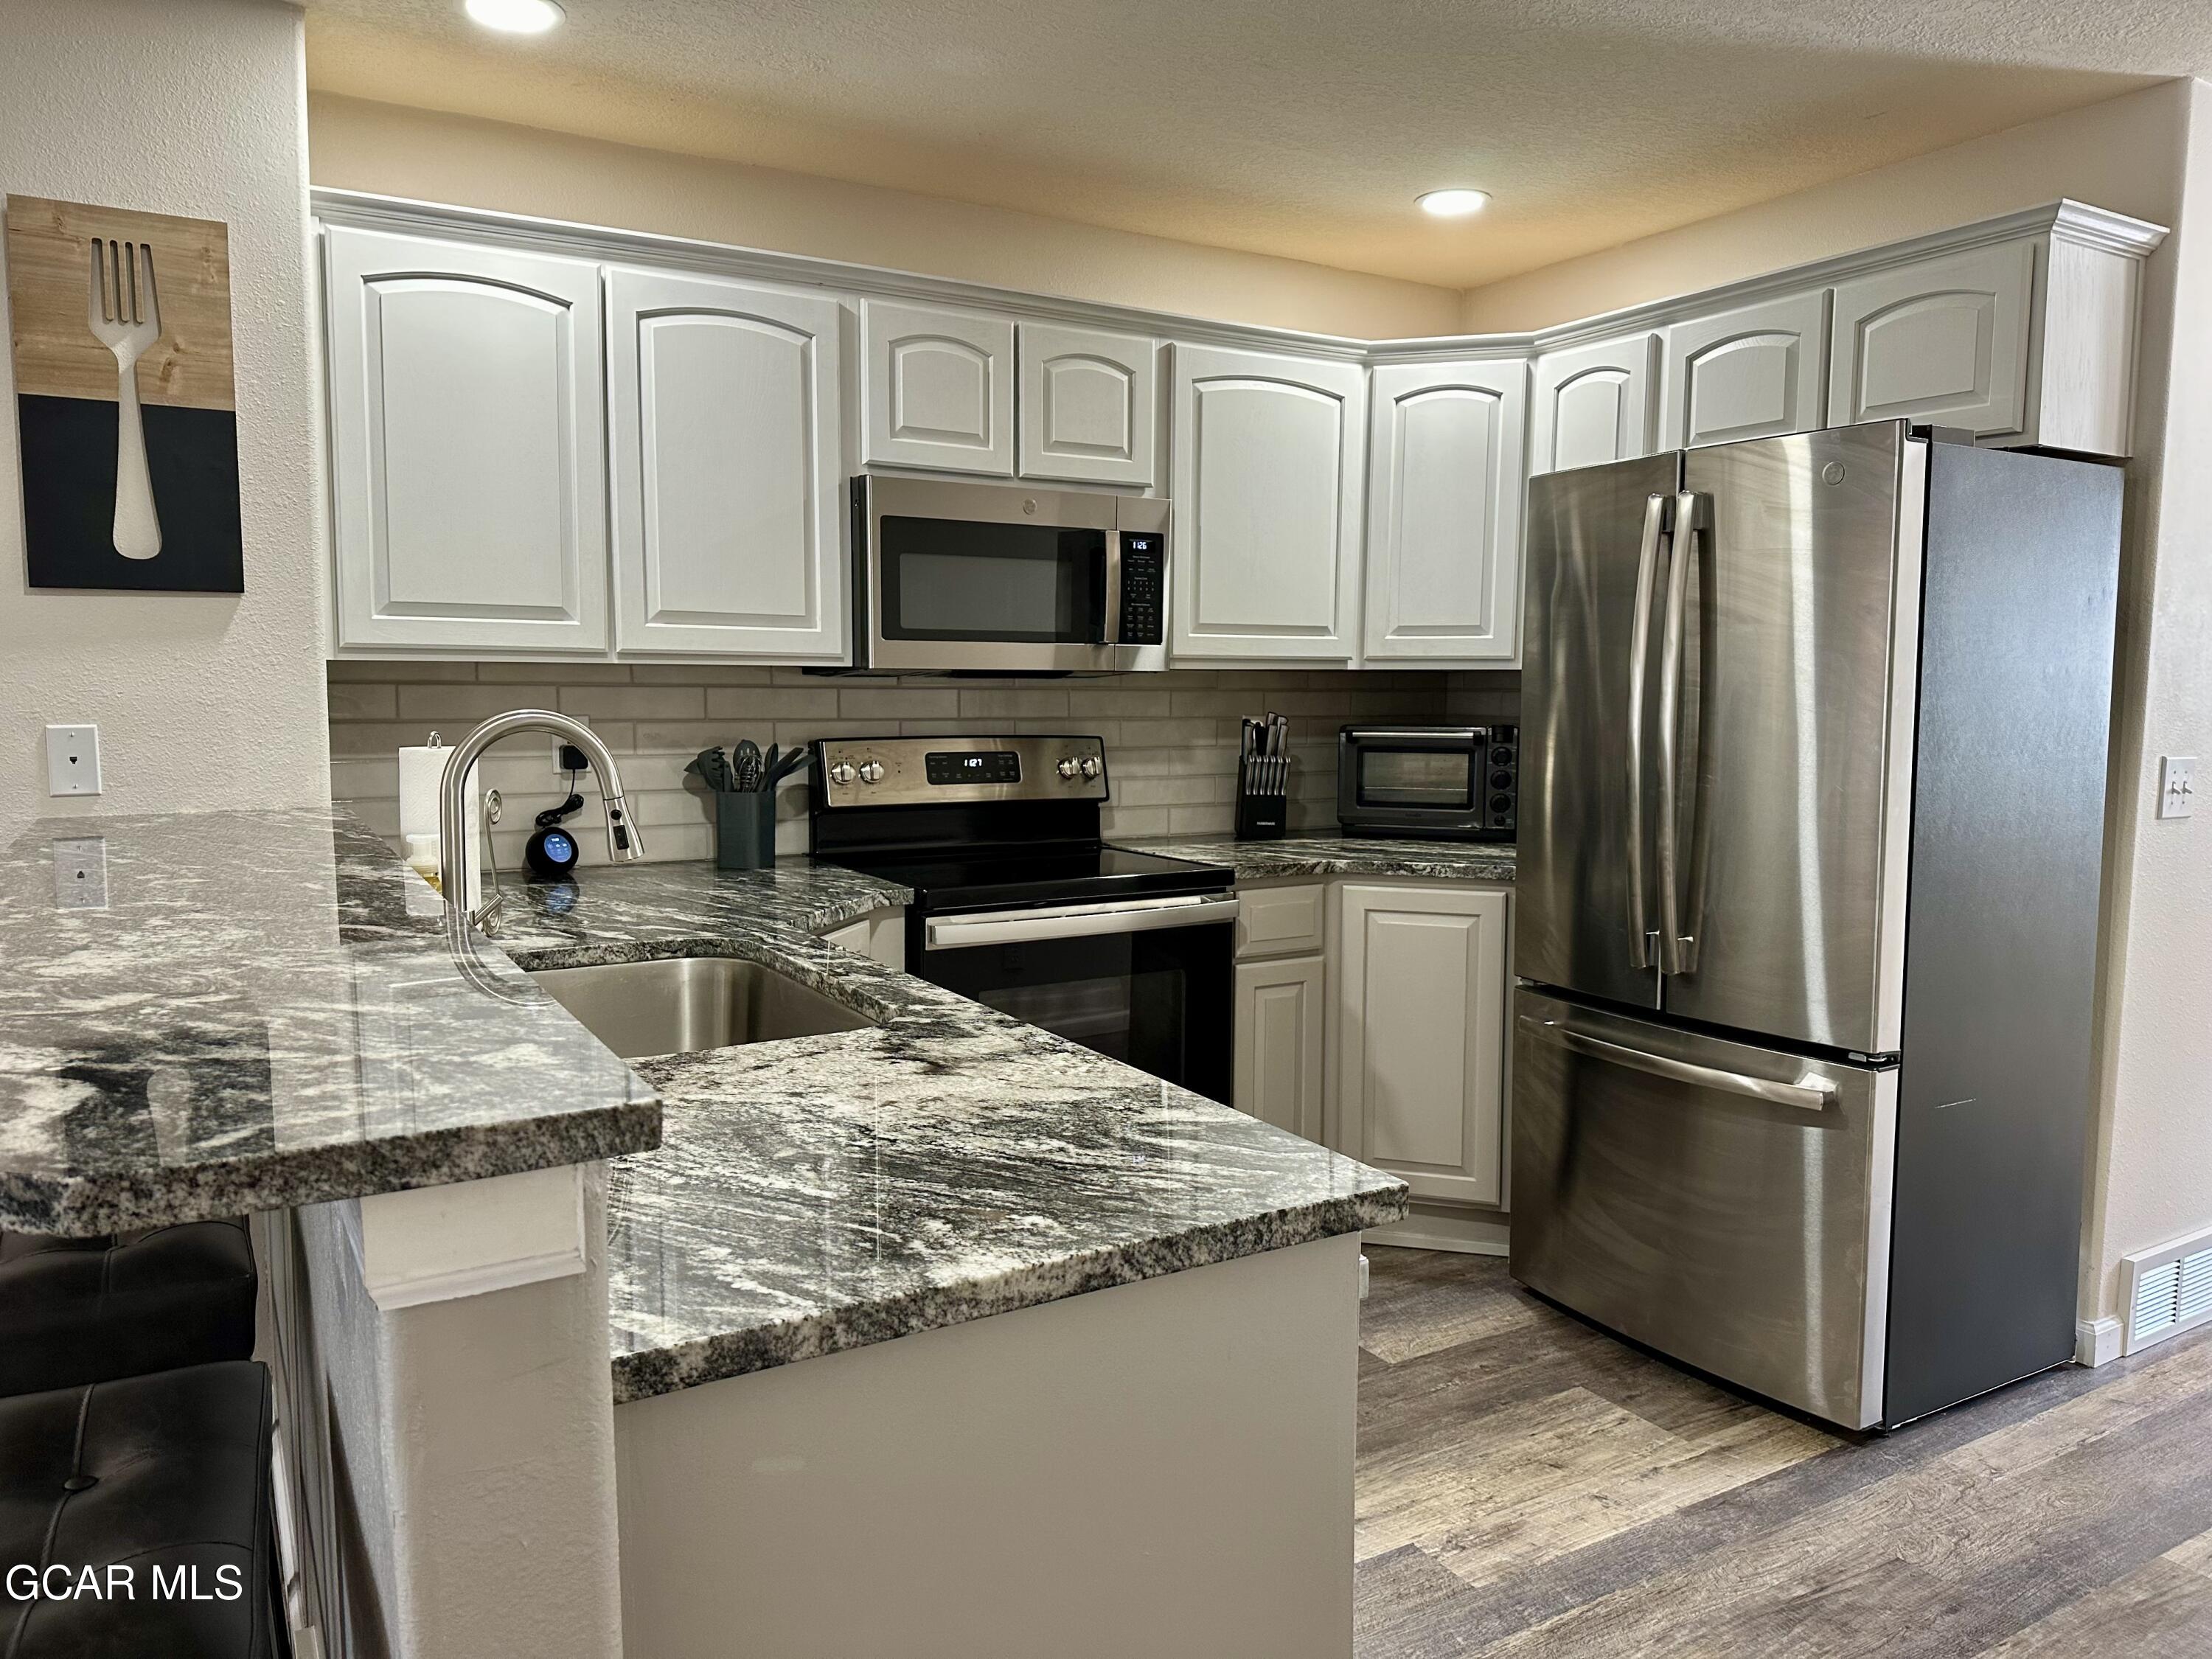 a kitchen with stainless steel appliances granite countertop a refrigerator stove microwave sink and cabinets